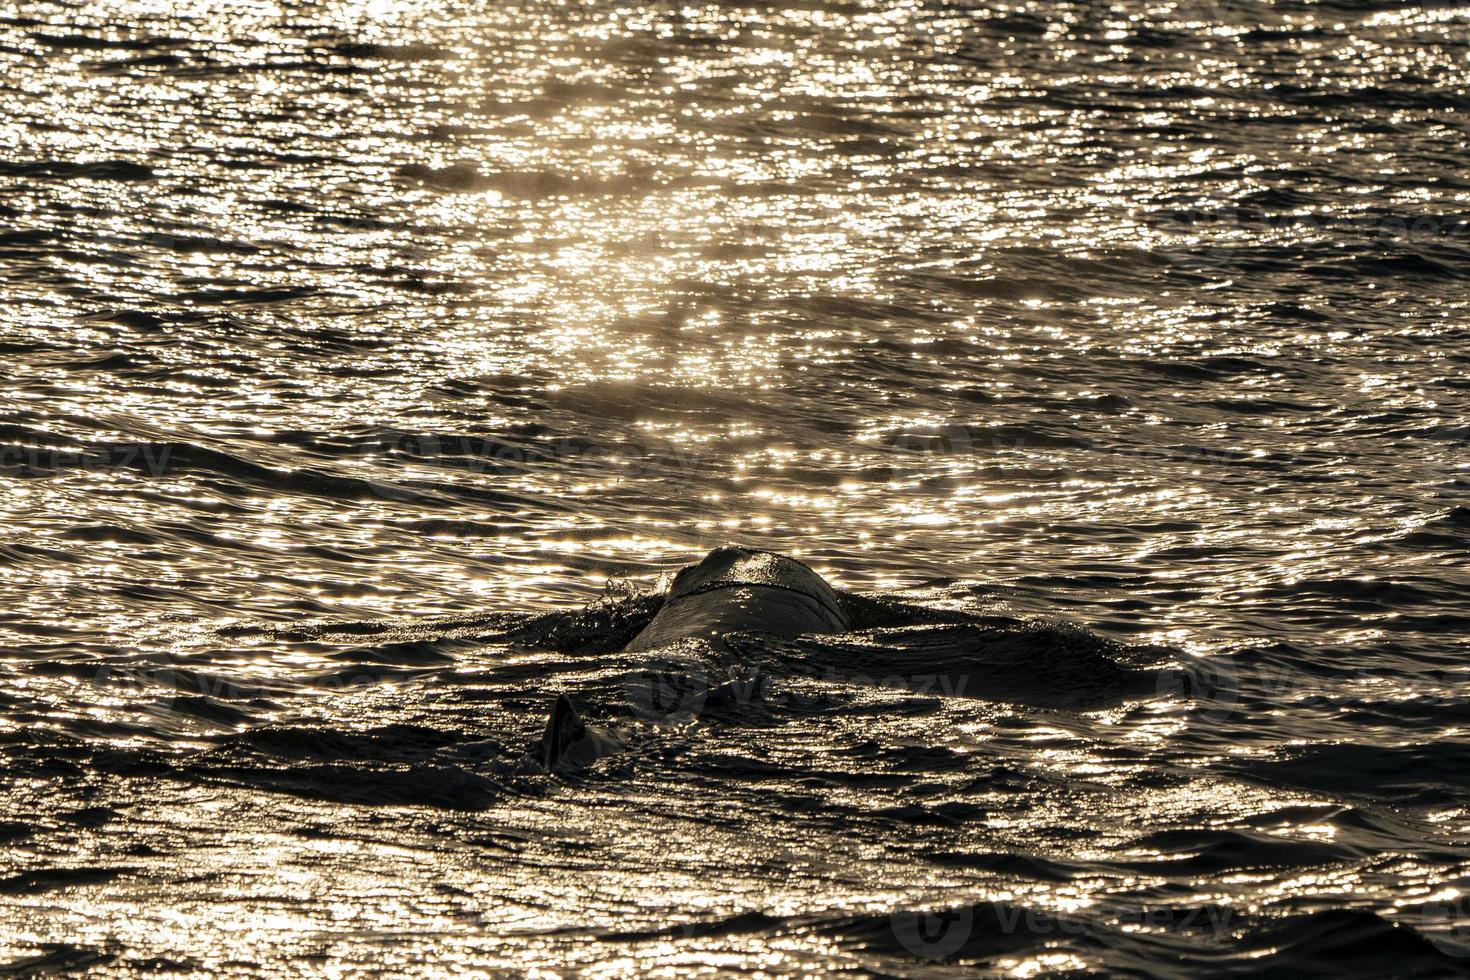 Sperm Whale head at sunset photo